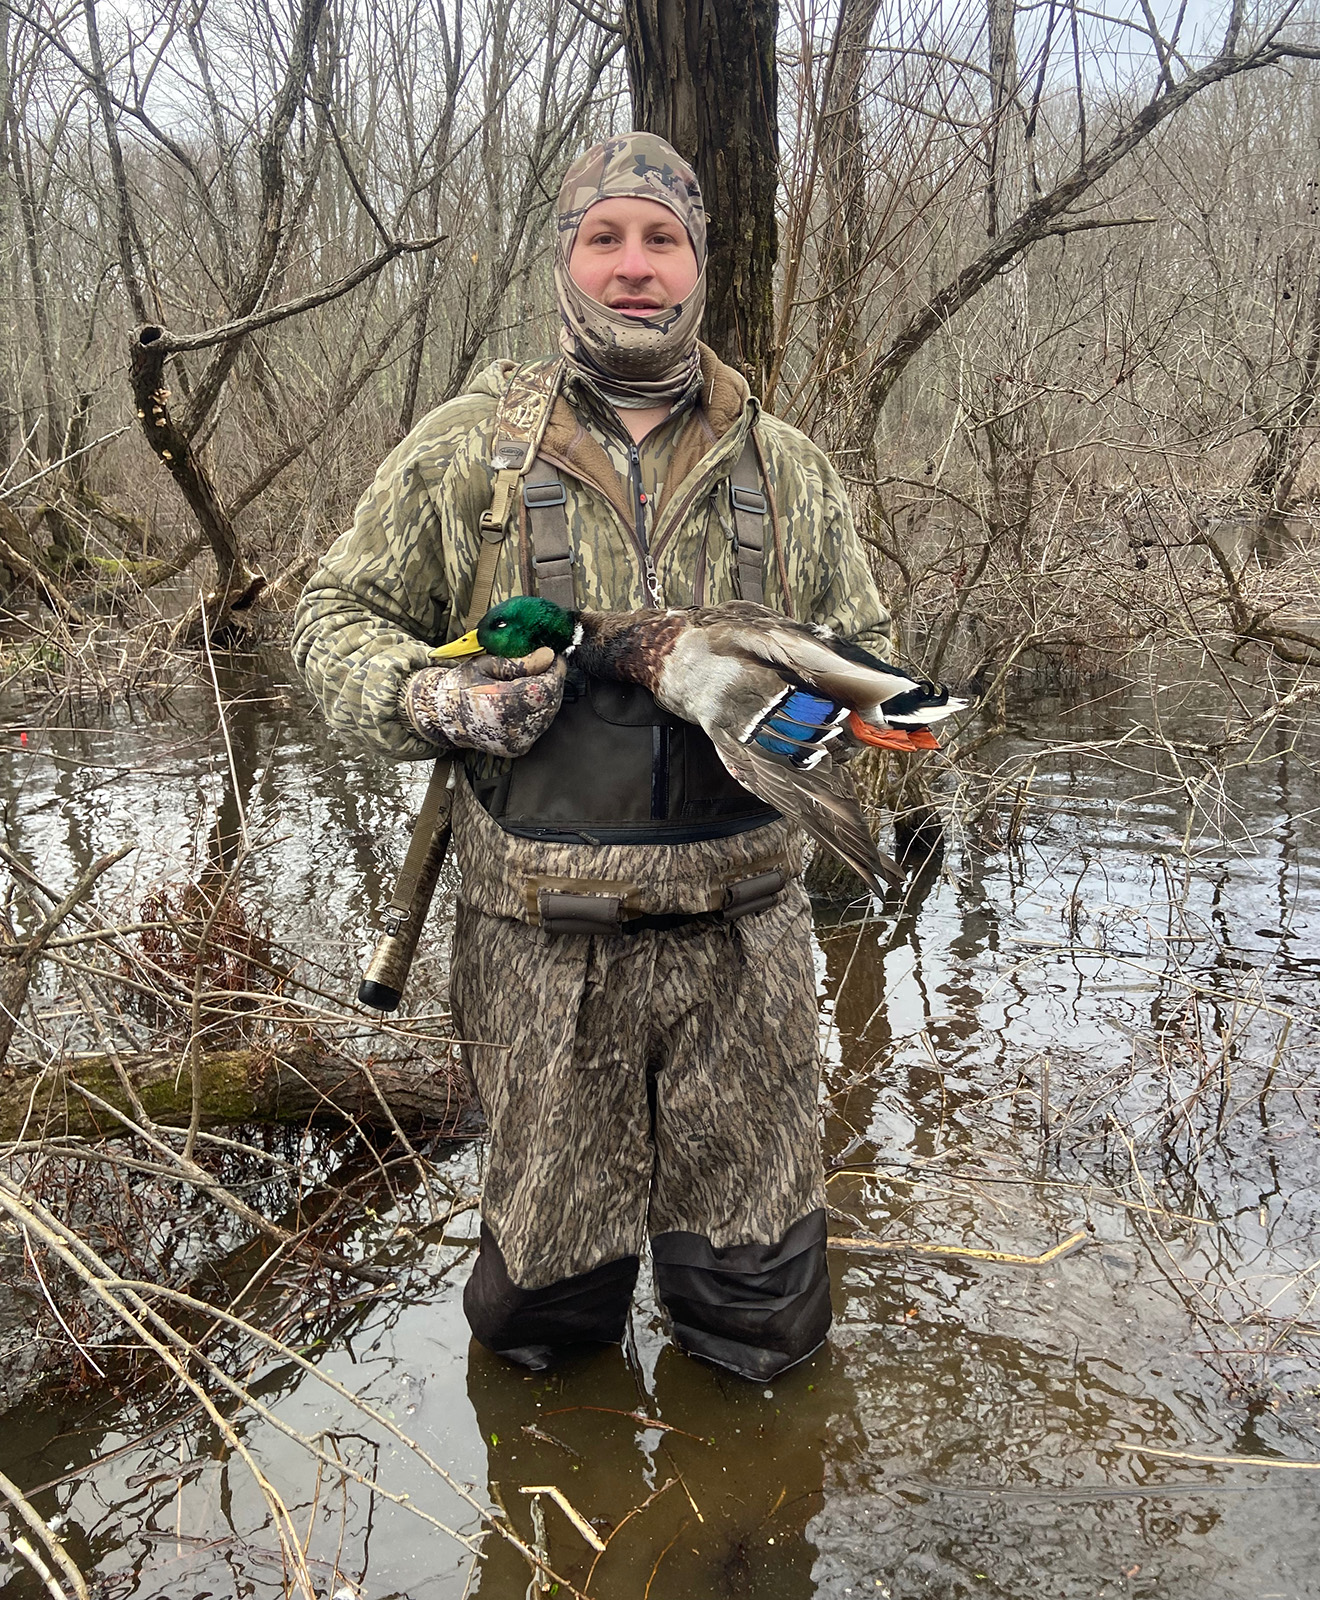 A duck hunter stands in the water of a marsh among trees, holding a harvested mallard duck with its distinctive green head.